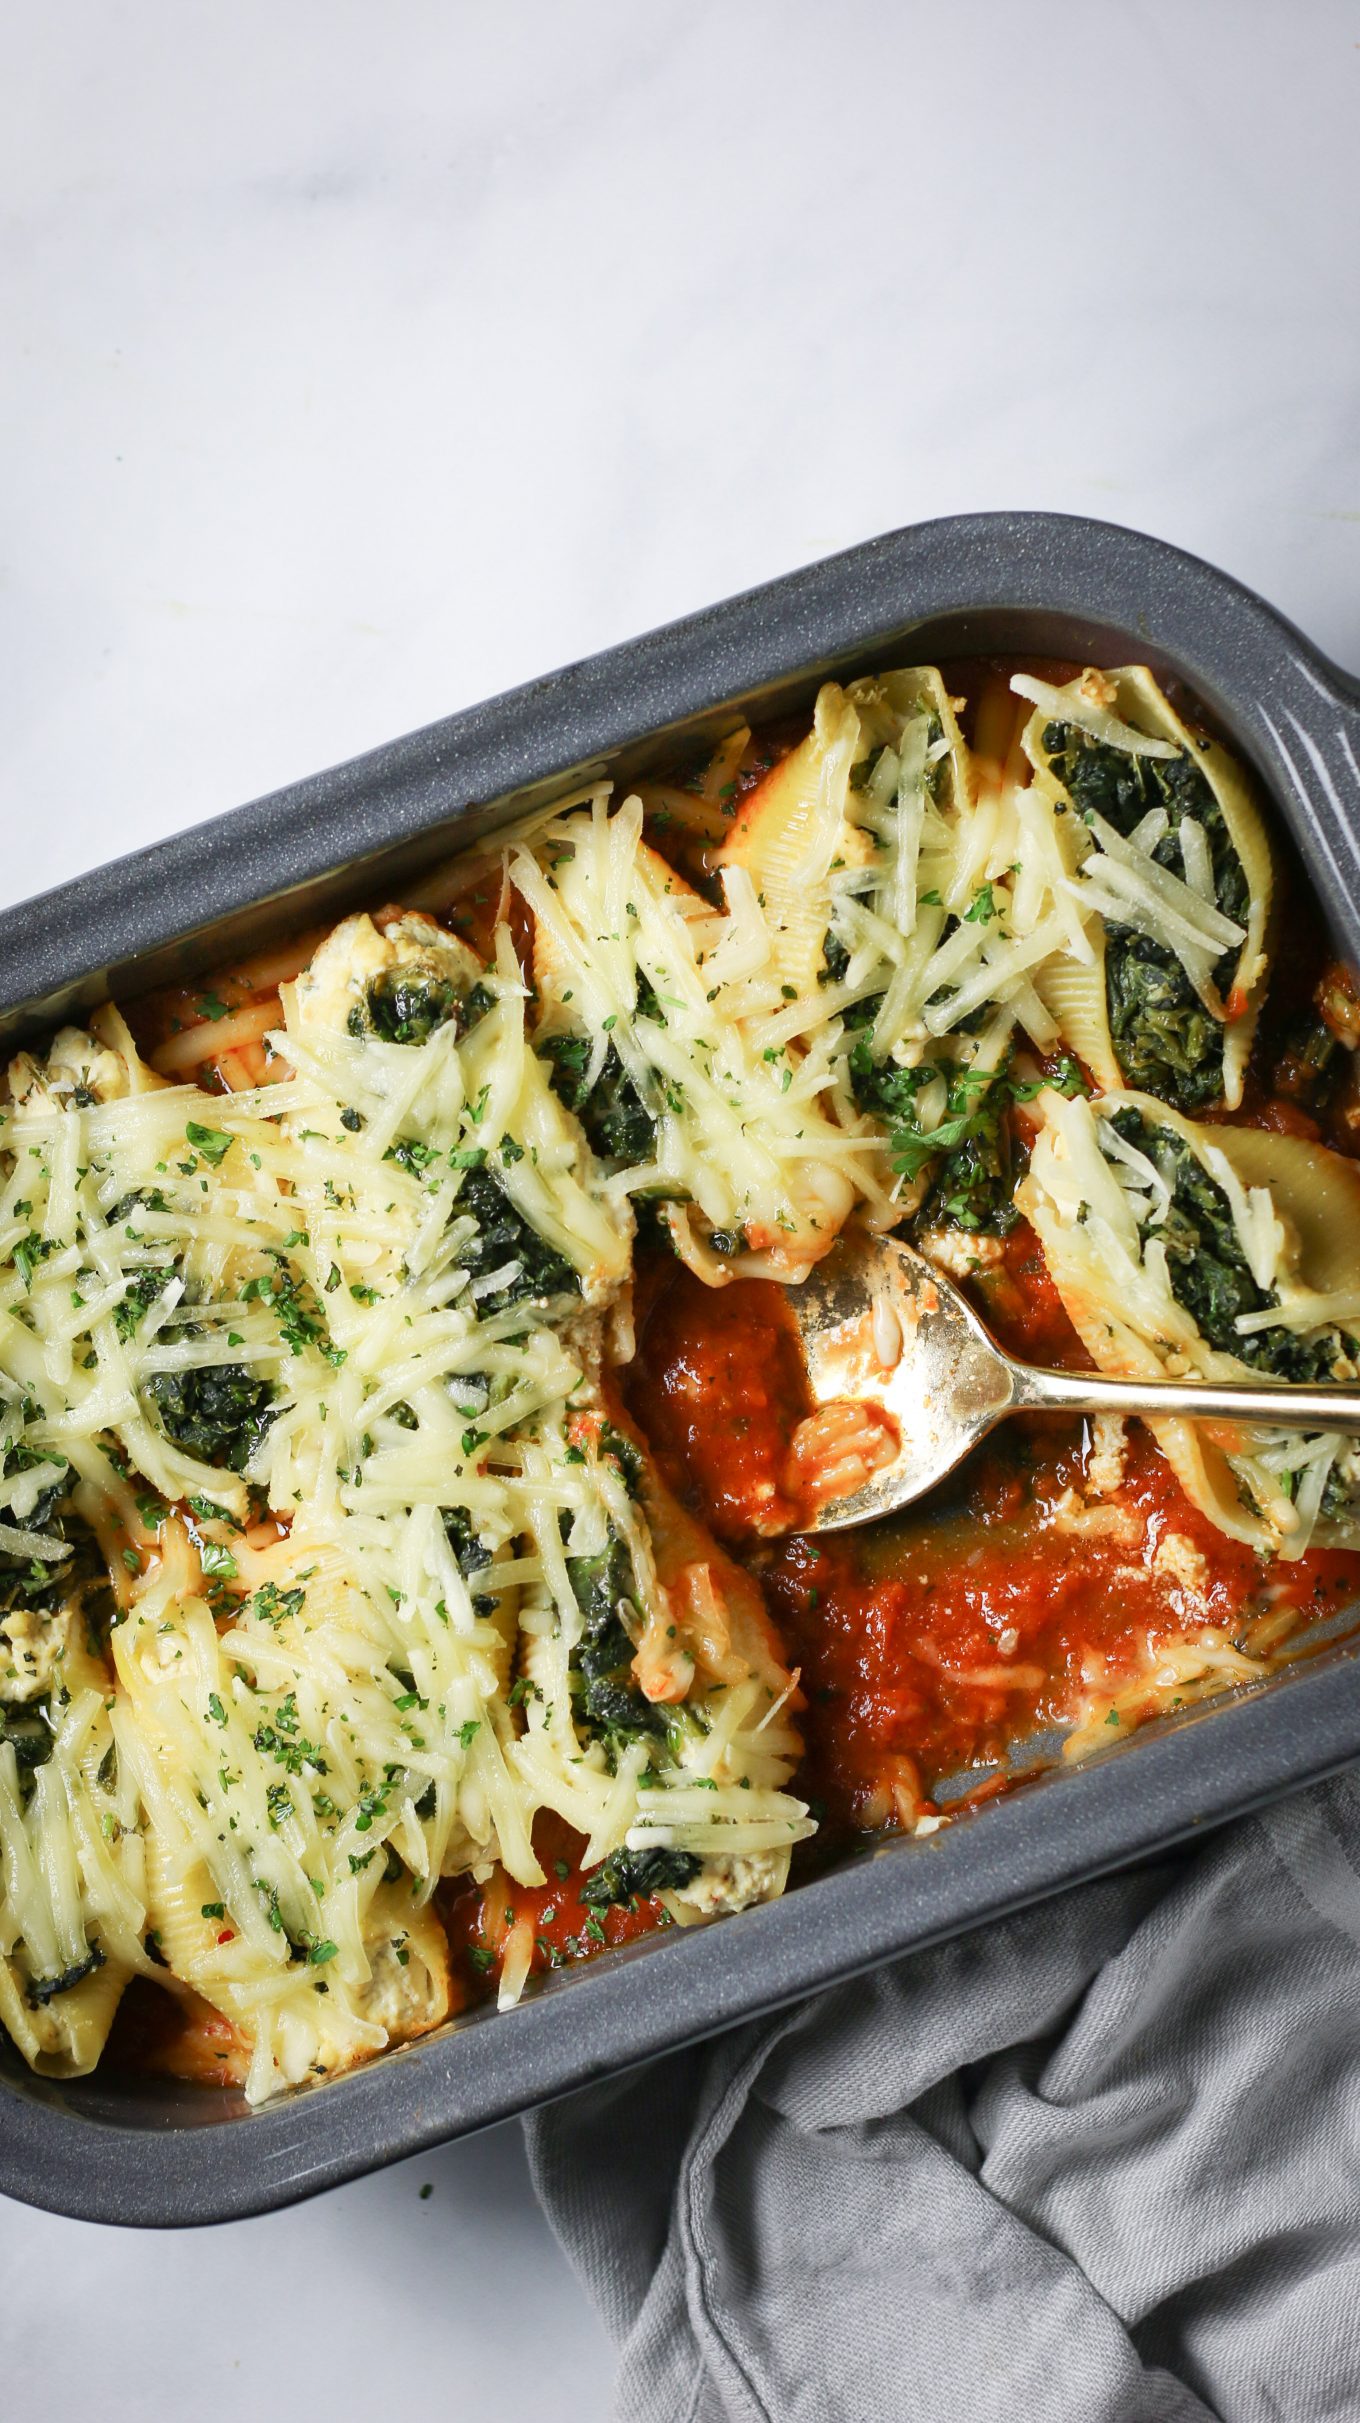 Vegan stuffed shells with spinach and cheese in a baking dish.